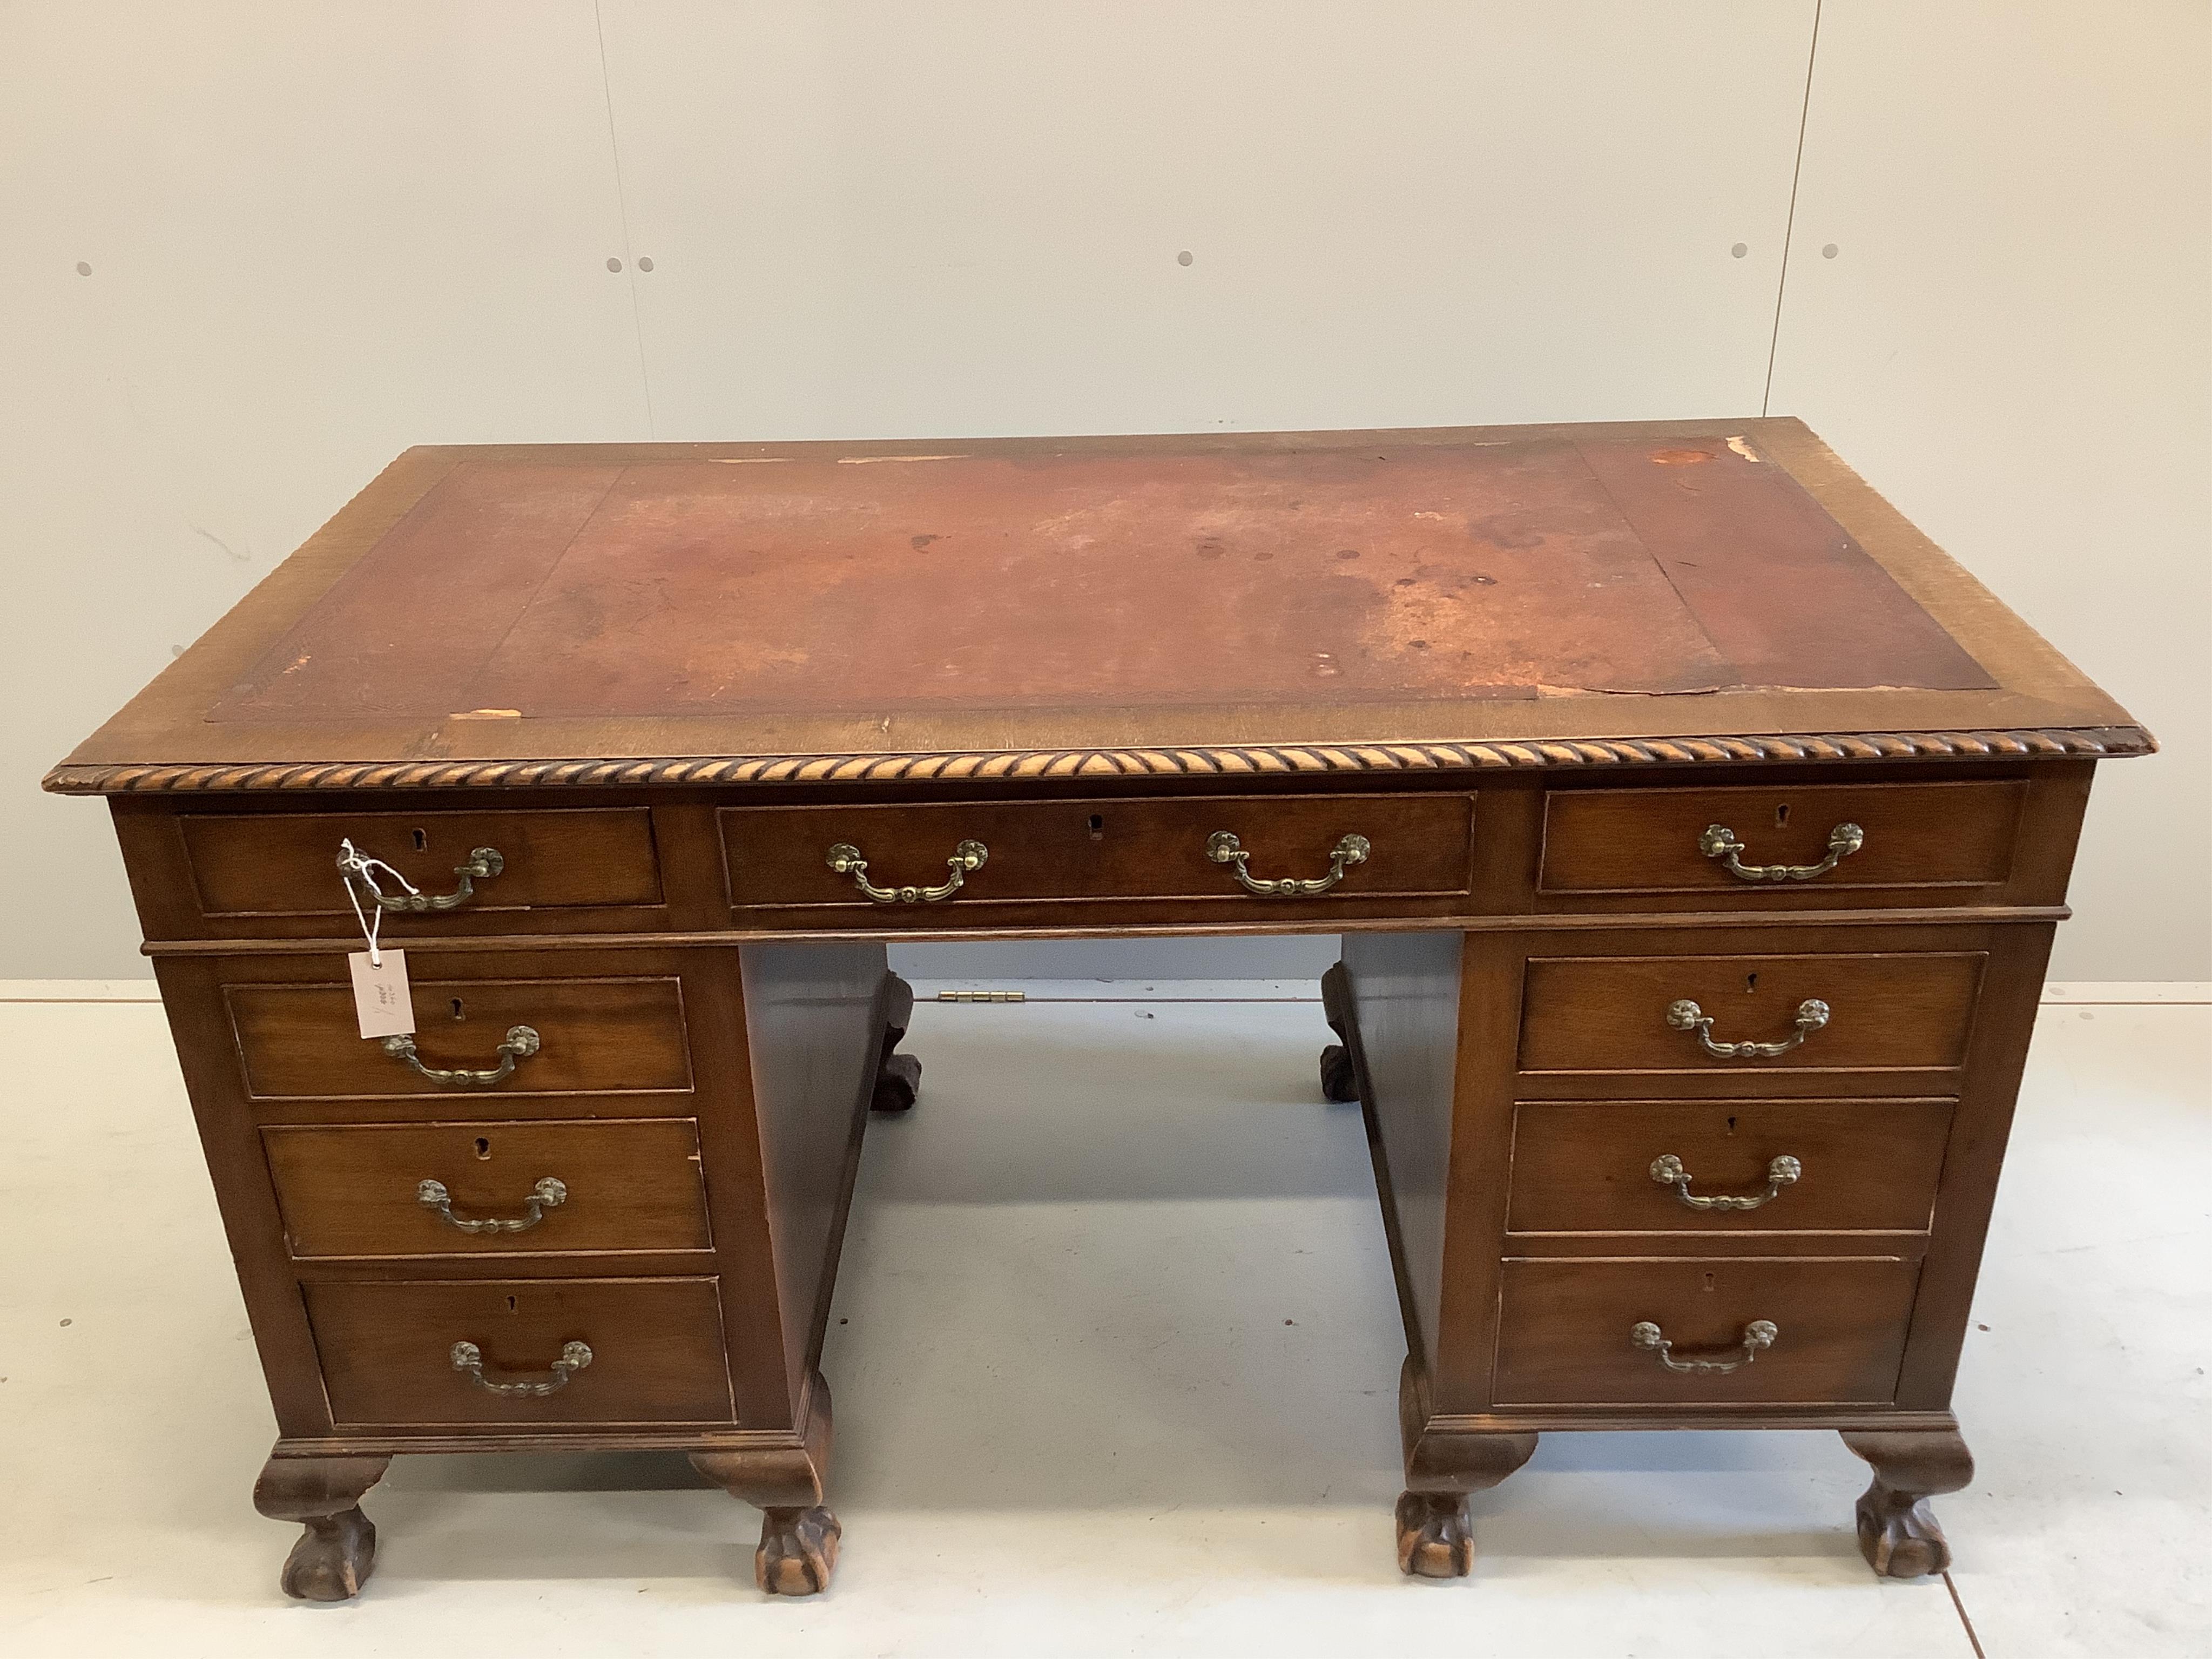 An early 20th century Chippendale Revival mahogany pedestal desk, width 138cm, depth 78cm, height 78cm. Condition - fair